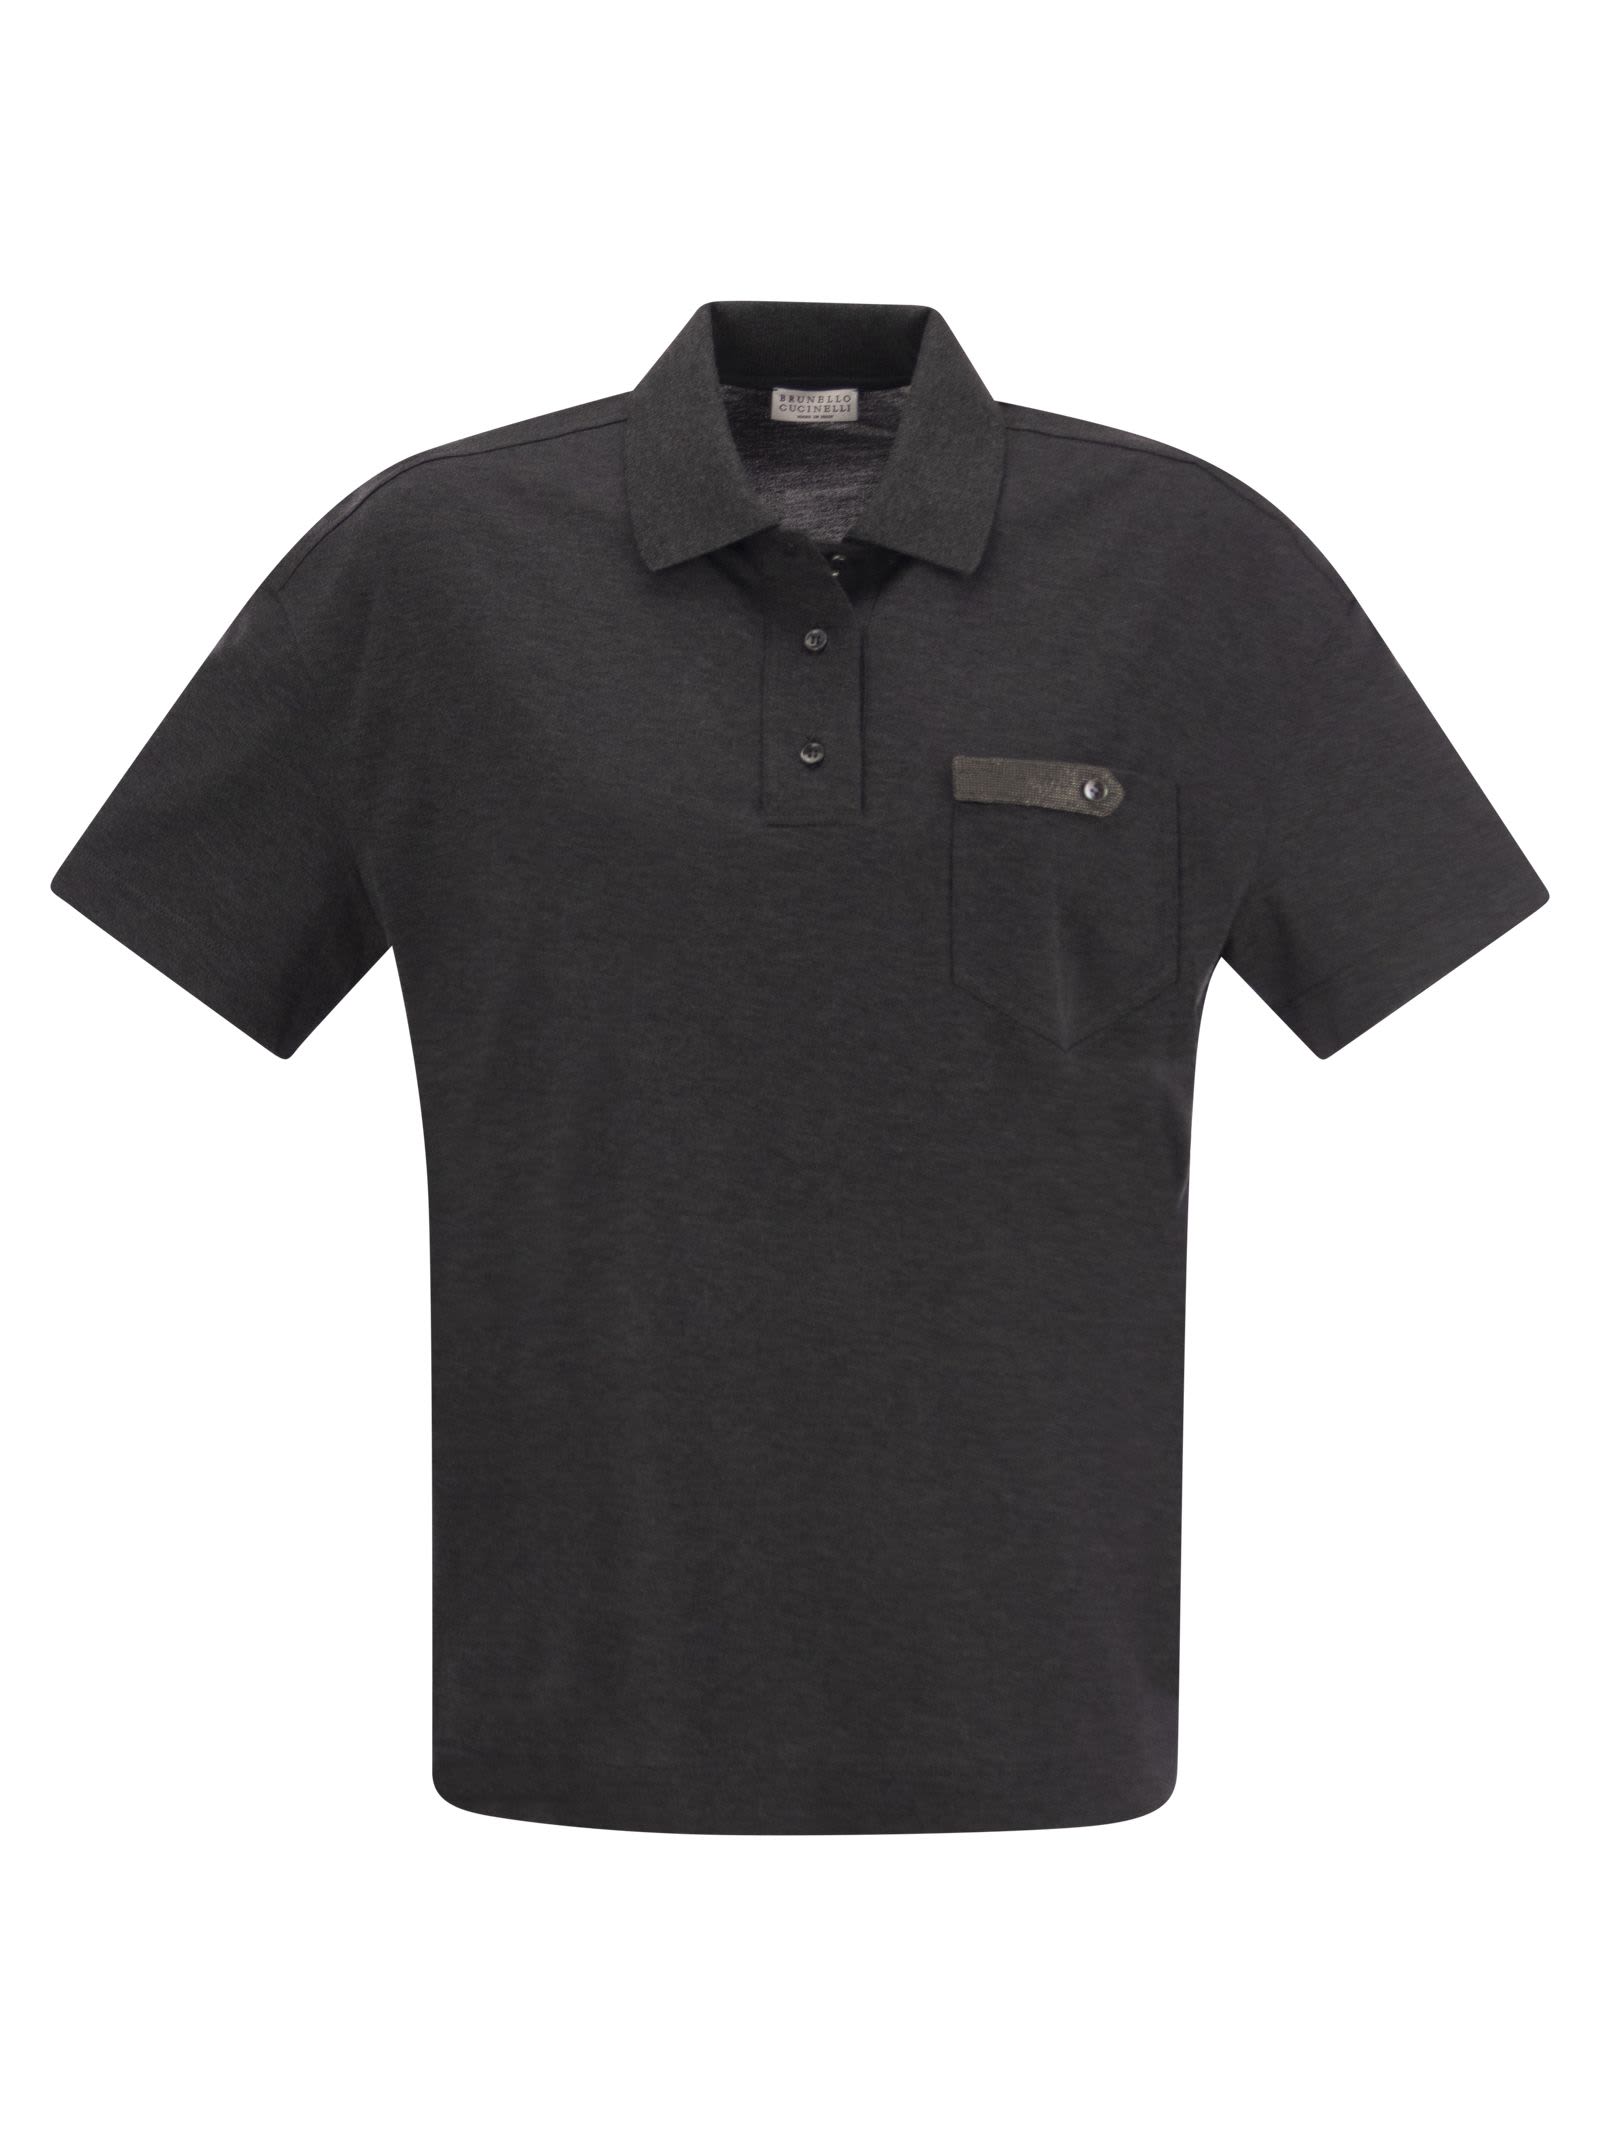 Lightweight Cotton Jersey Polo Shirt With Precious Button Tab